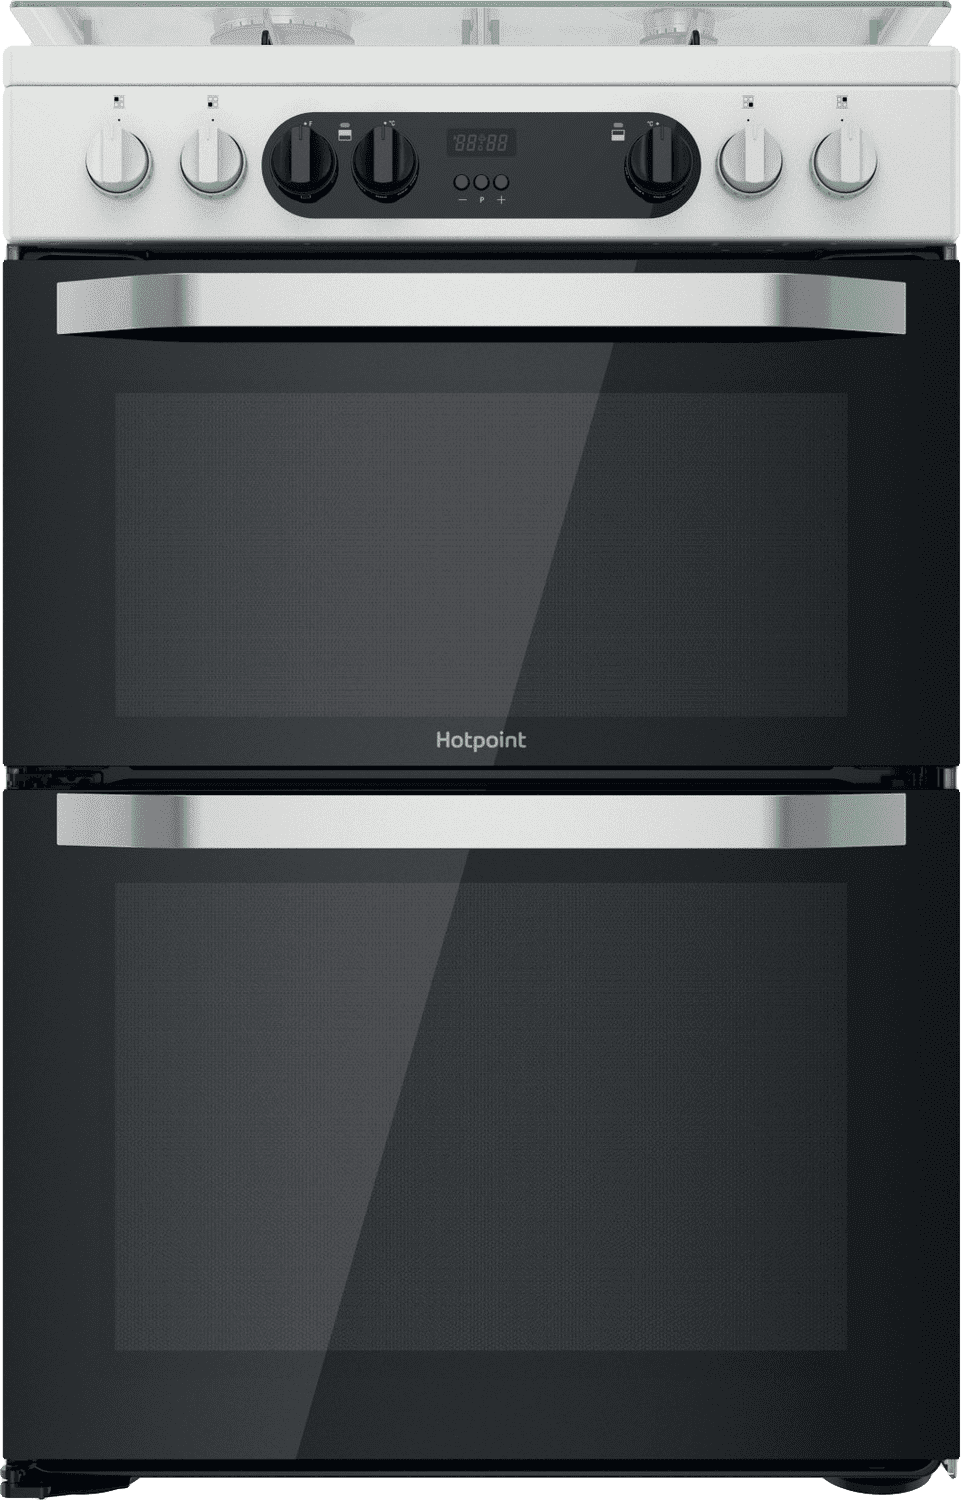 Hotpoint HDM67G9C2CW/UK 60cm Freestanding Dual Fuel Cooker - White - A/A Rated, White